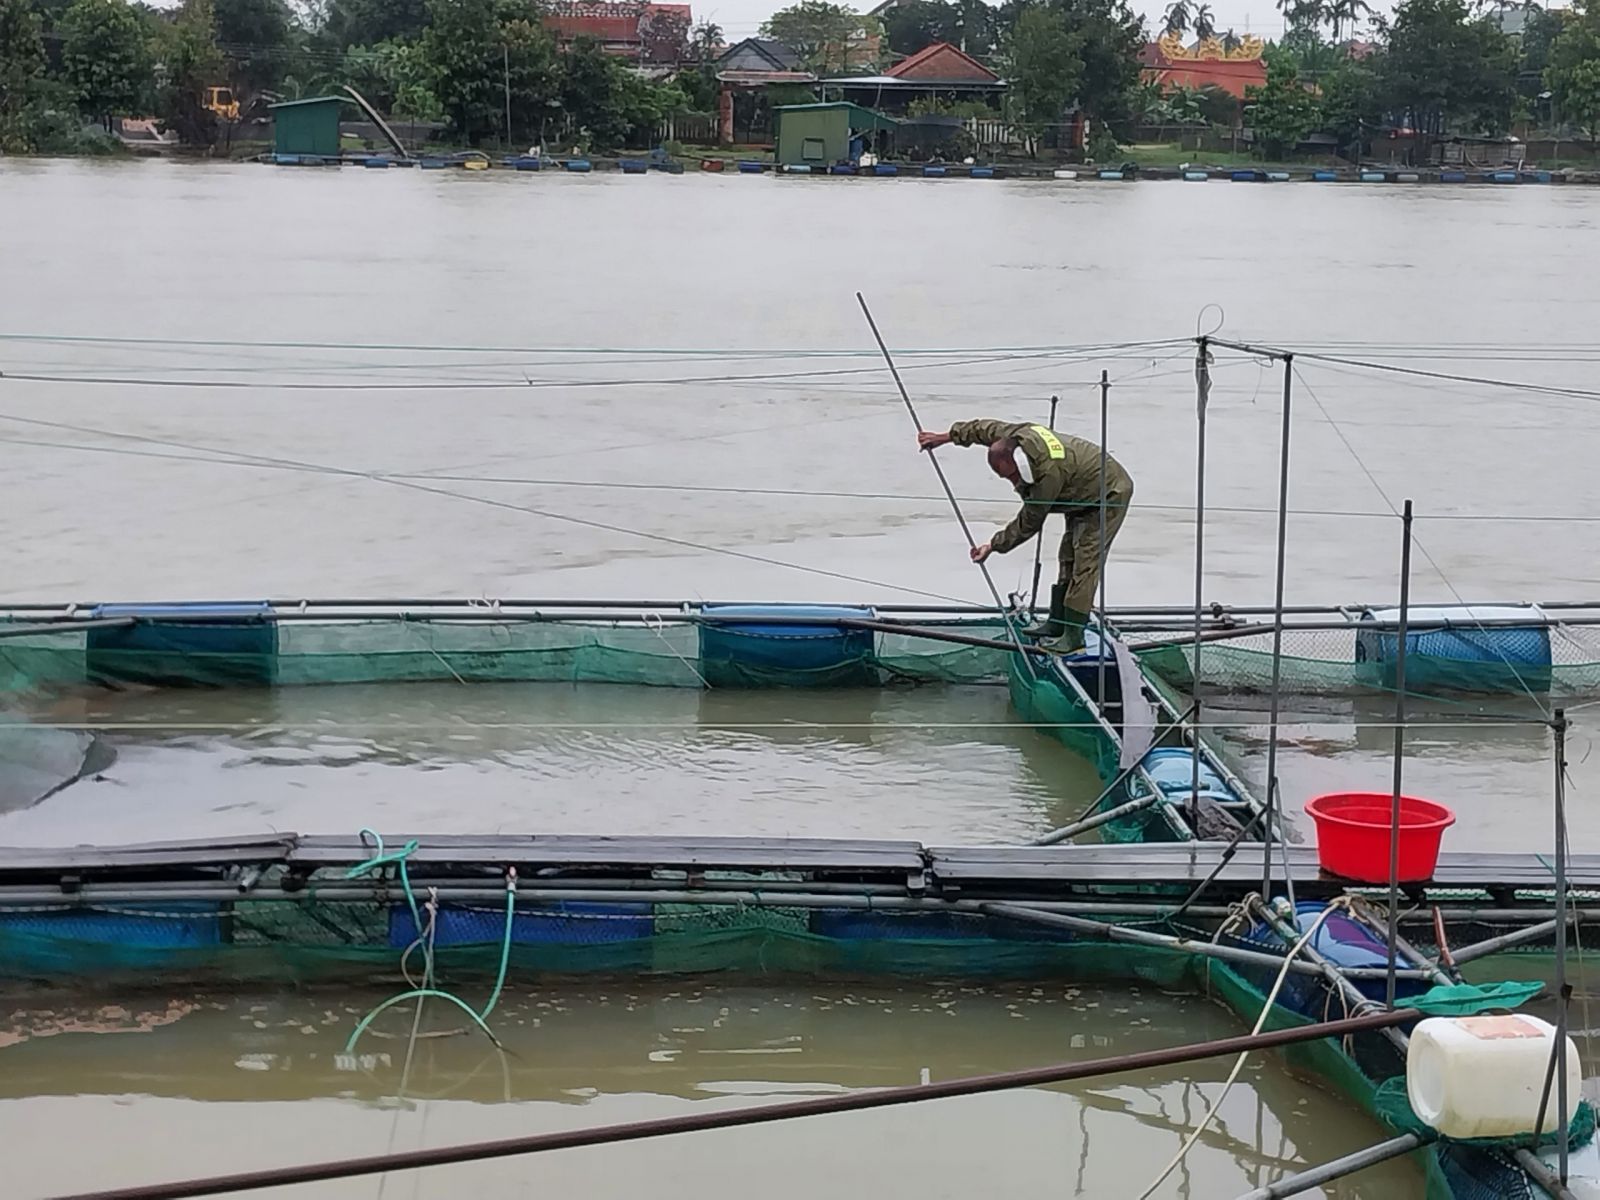 Local residents picking up fish in cages dying from floodwater